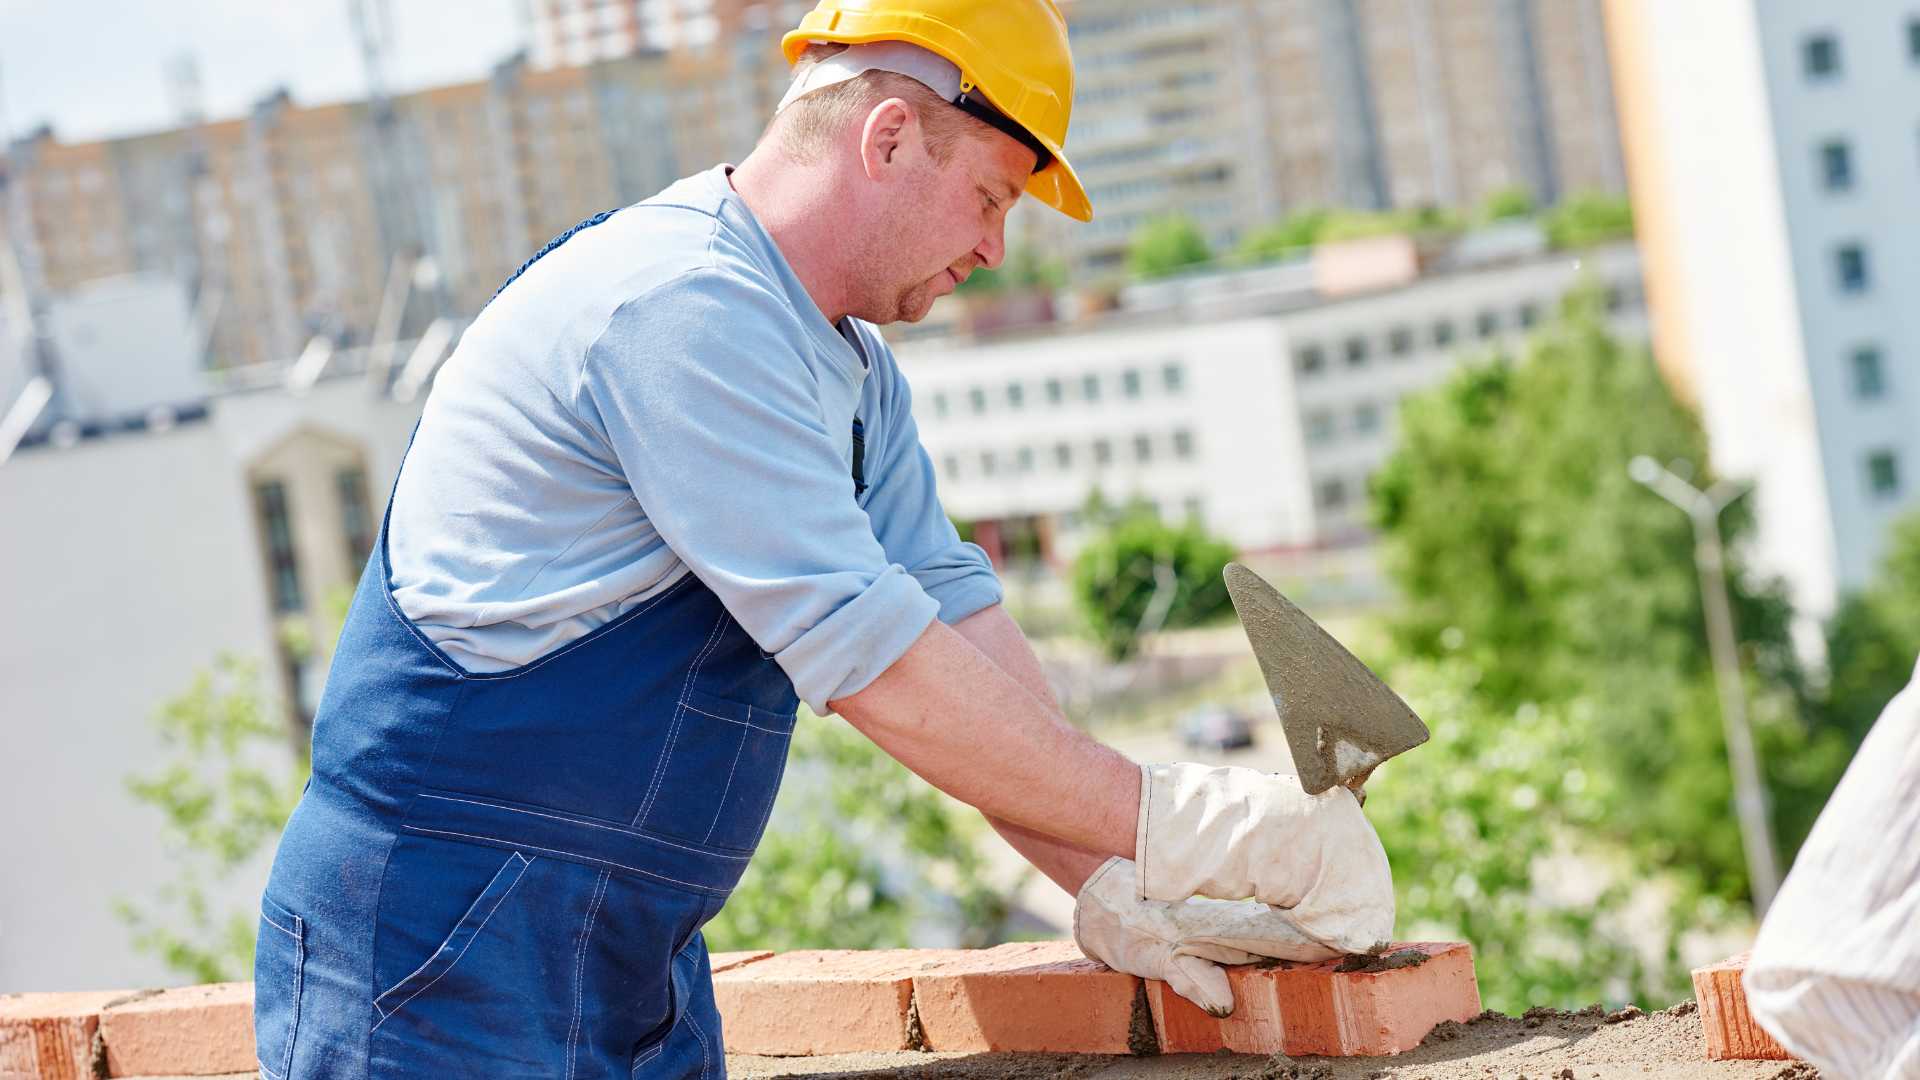 Bricklayers Needed in Woking